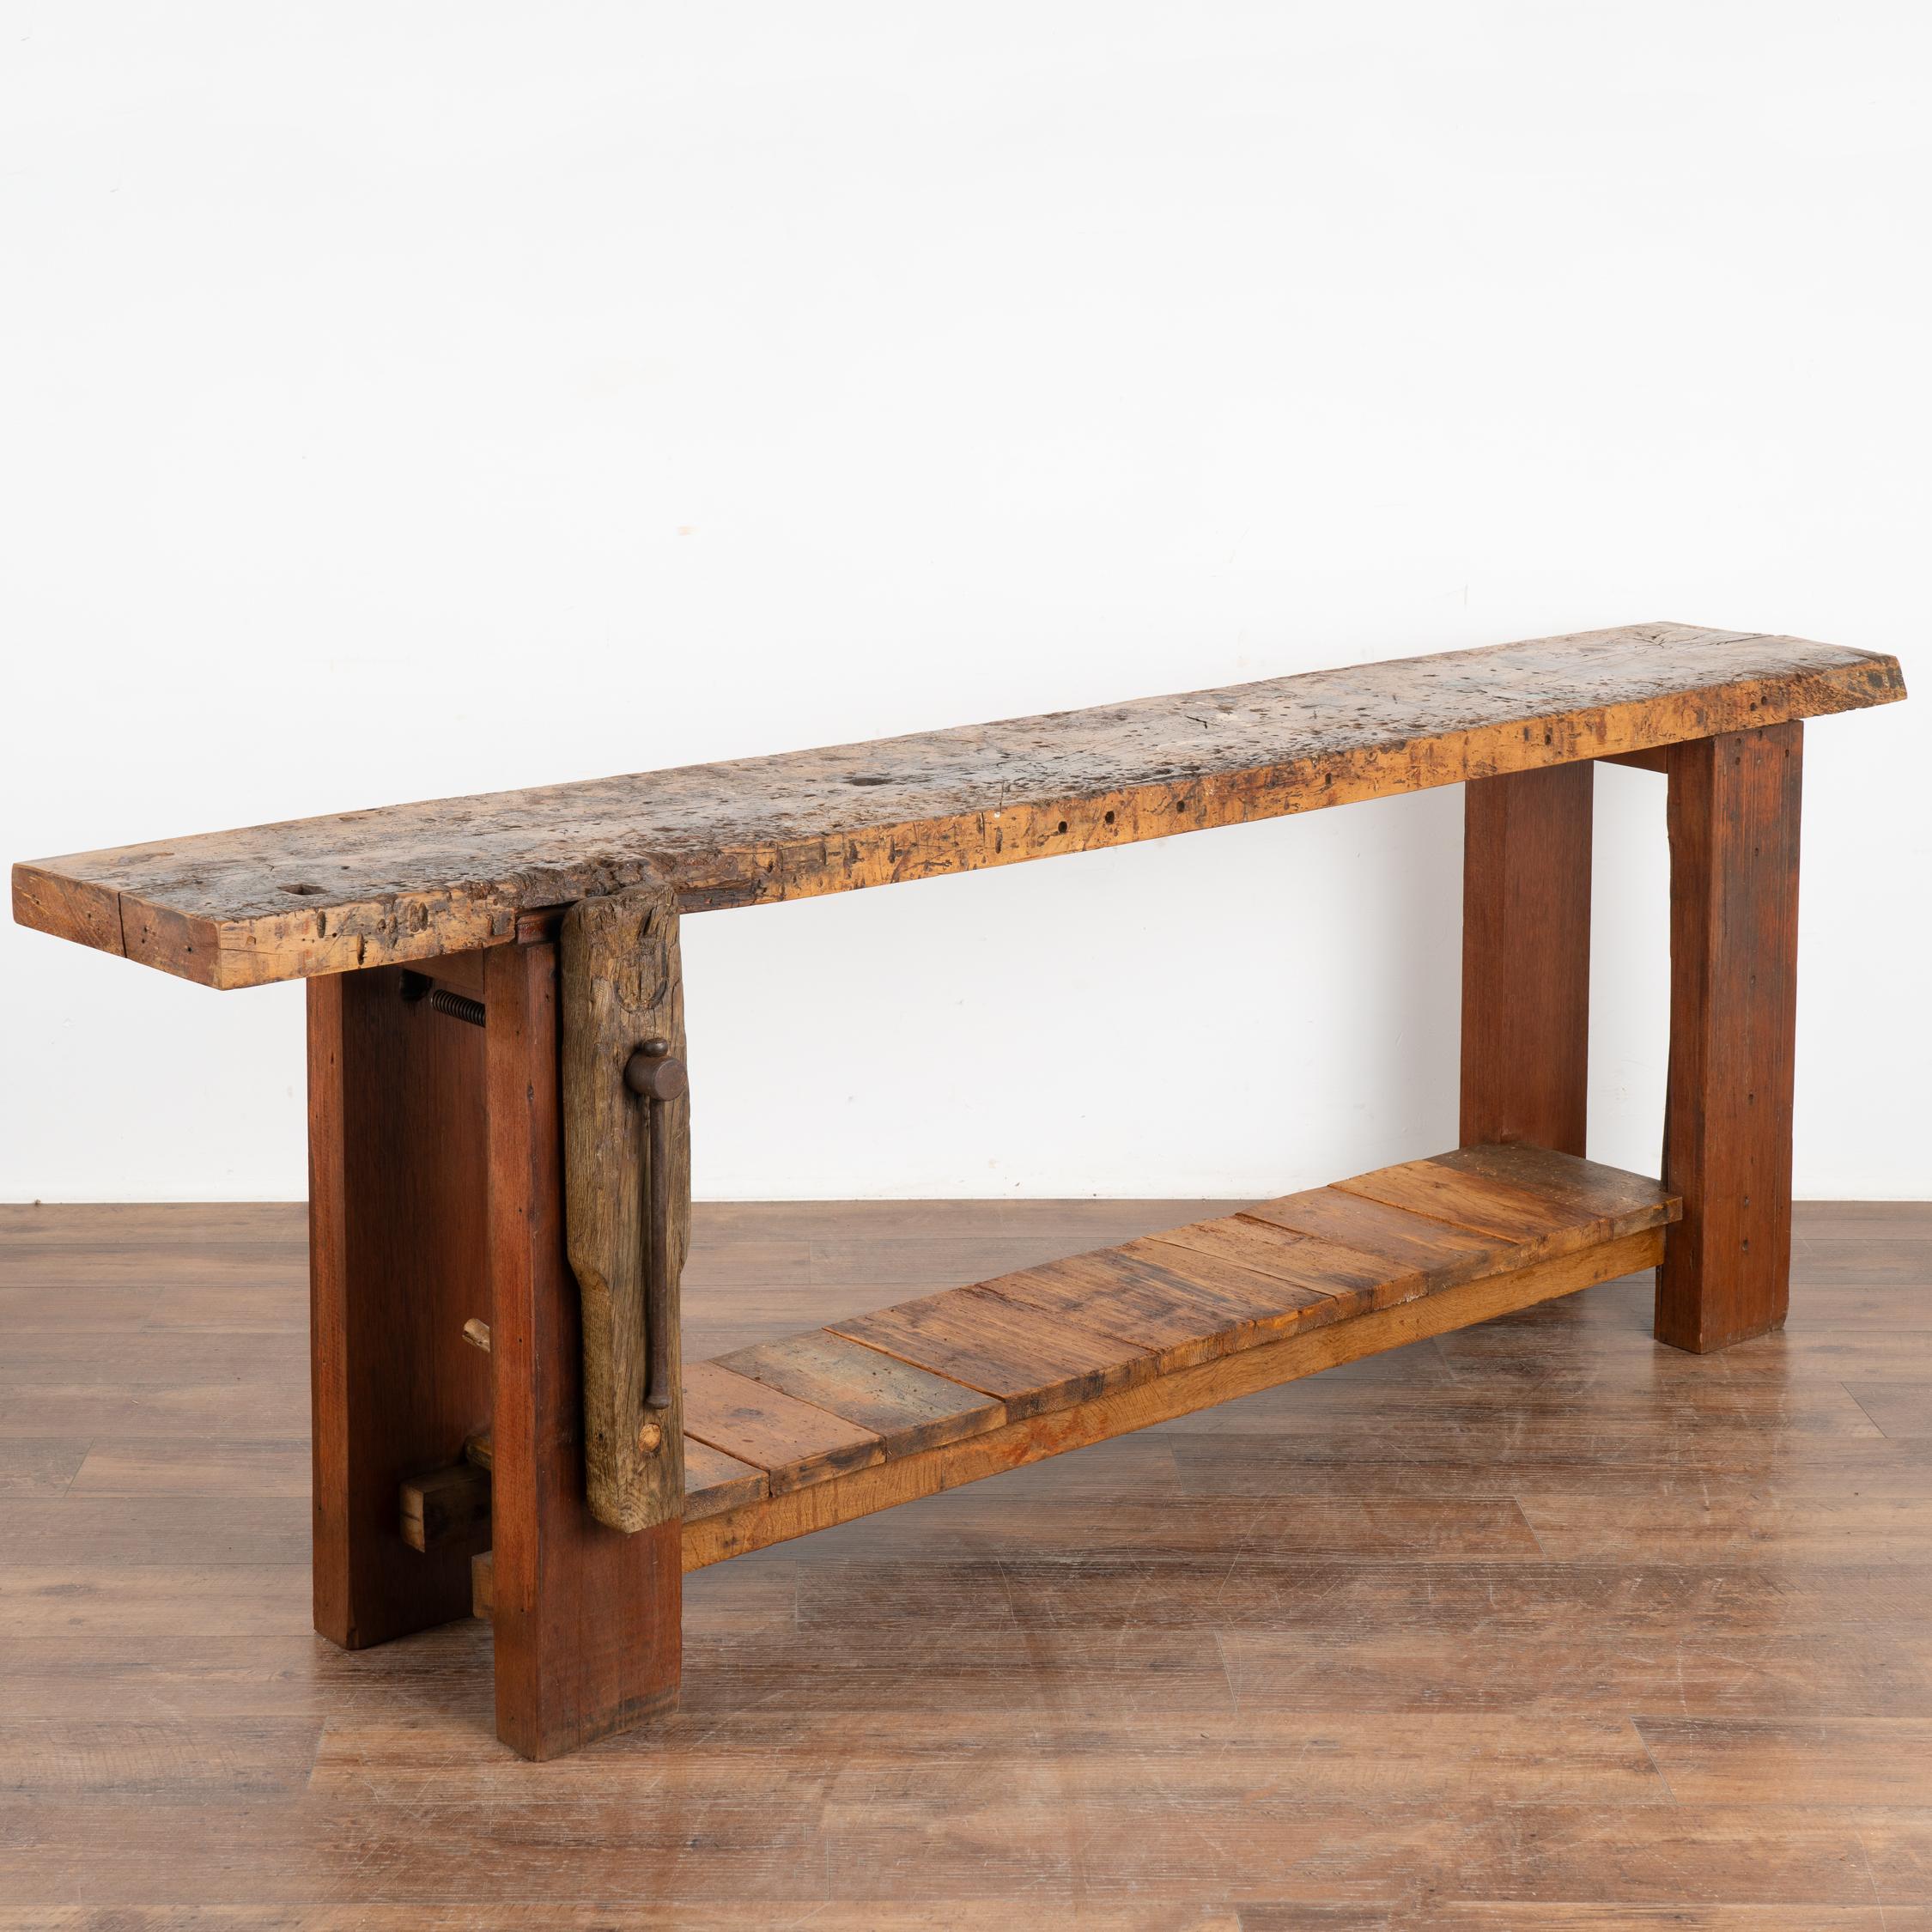 Antique French carpenter's workbench rustic console table with lower shelf.
The years of constant use are revealed in every ding, gouge, stain, paint spills (including green, yellow and red) and scratch has enriched the character of this impressive